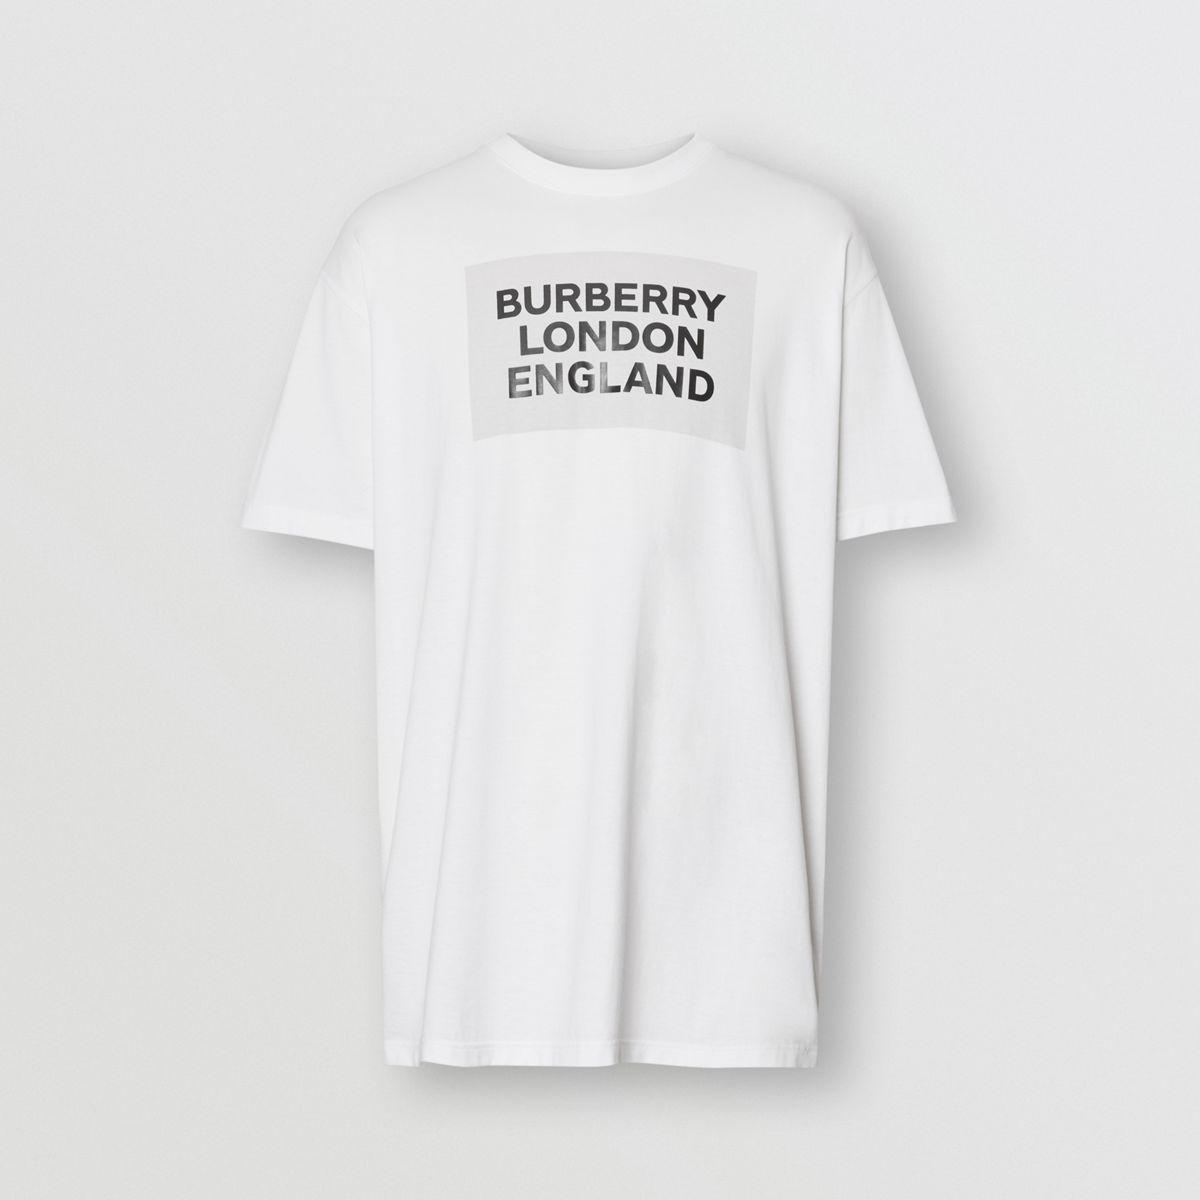 Burberry London England Logo Cotton T-shirt in White for Men - Save 70% -  Lyst